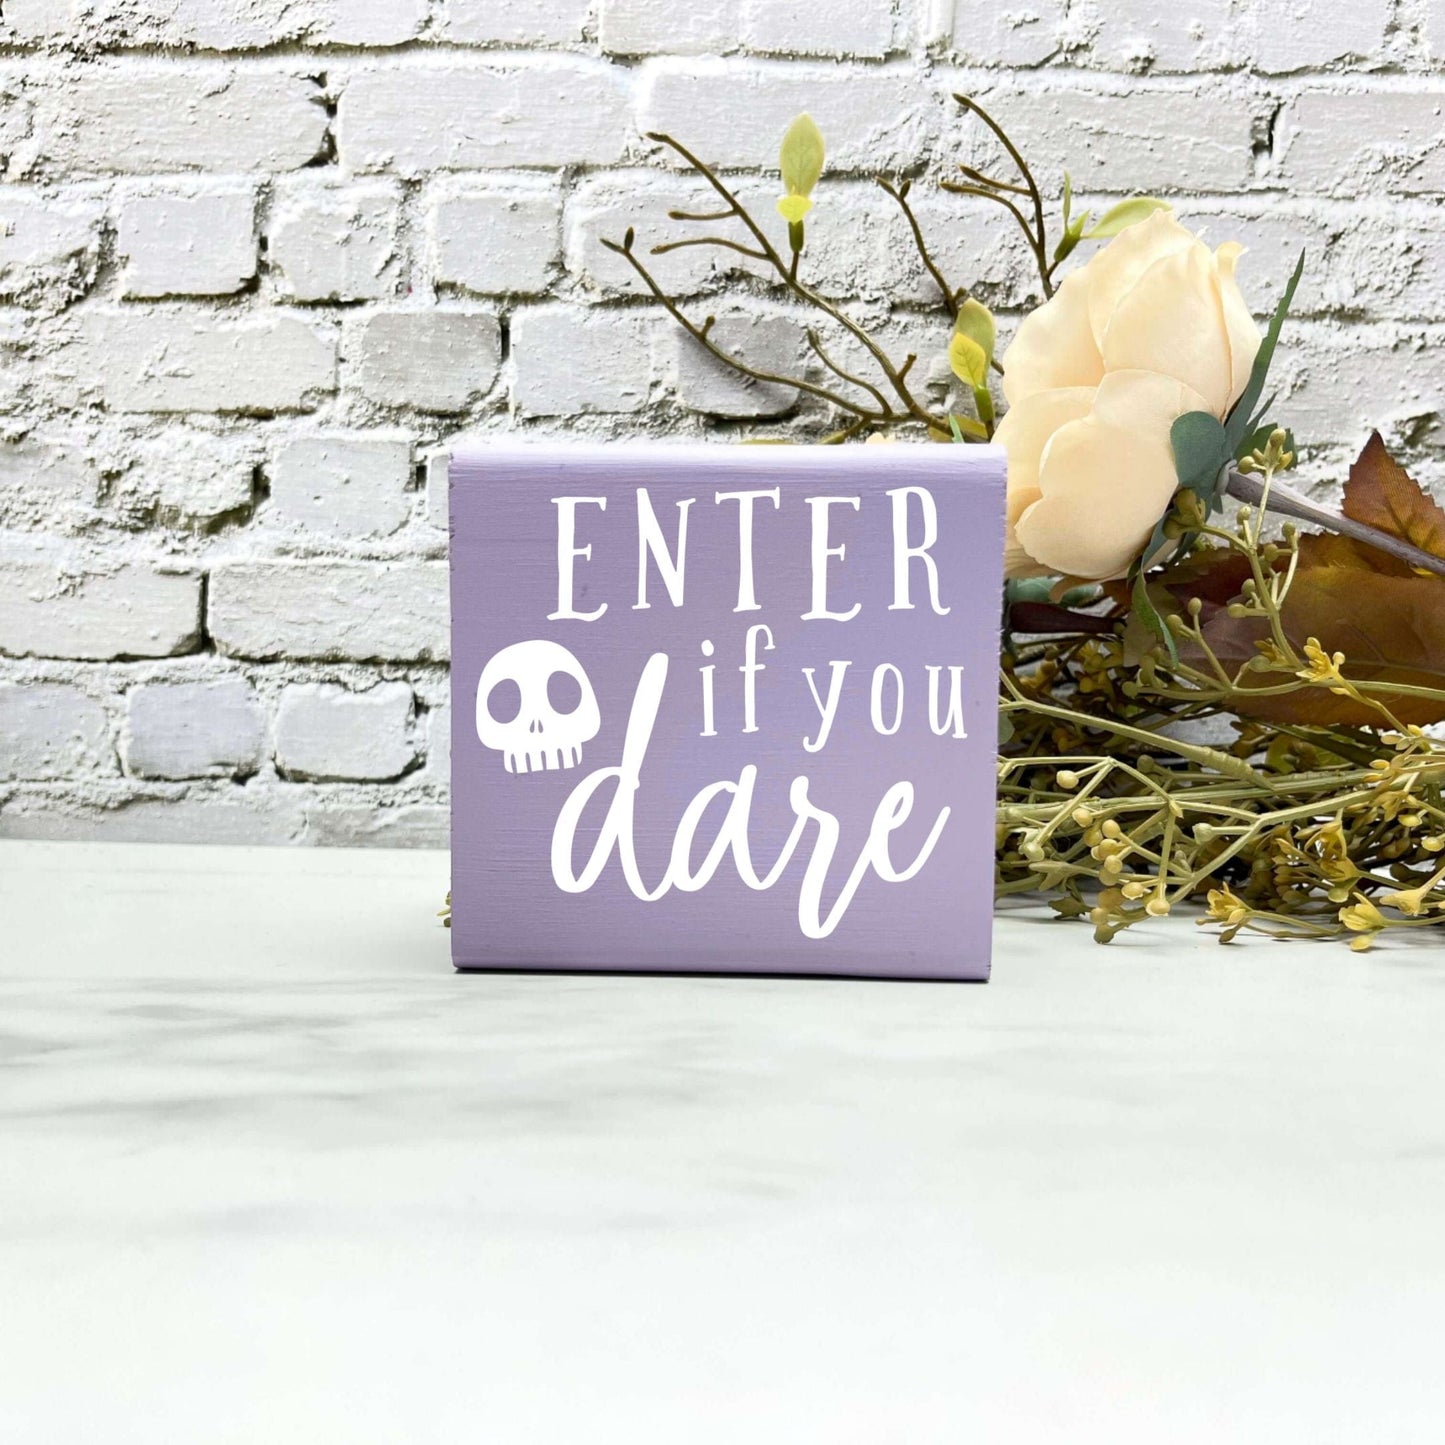 Enter if you dare Wood Sign, Halloween Wood Sign, Halloween Home Decor, Spooky Decor